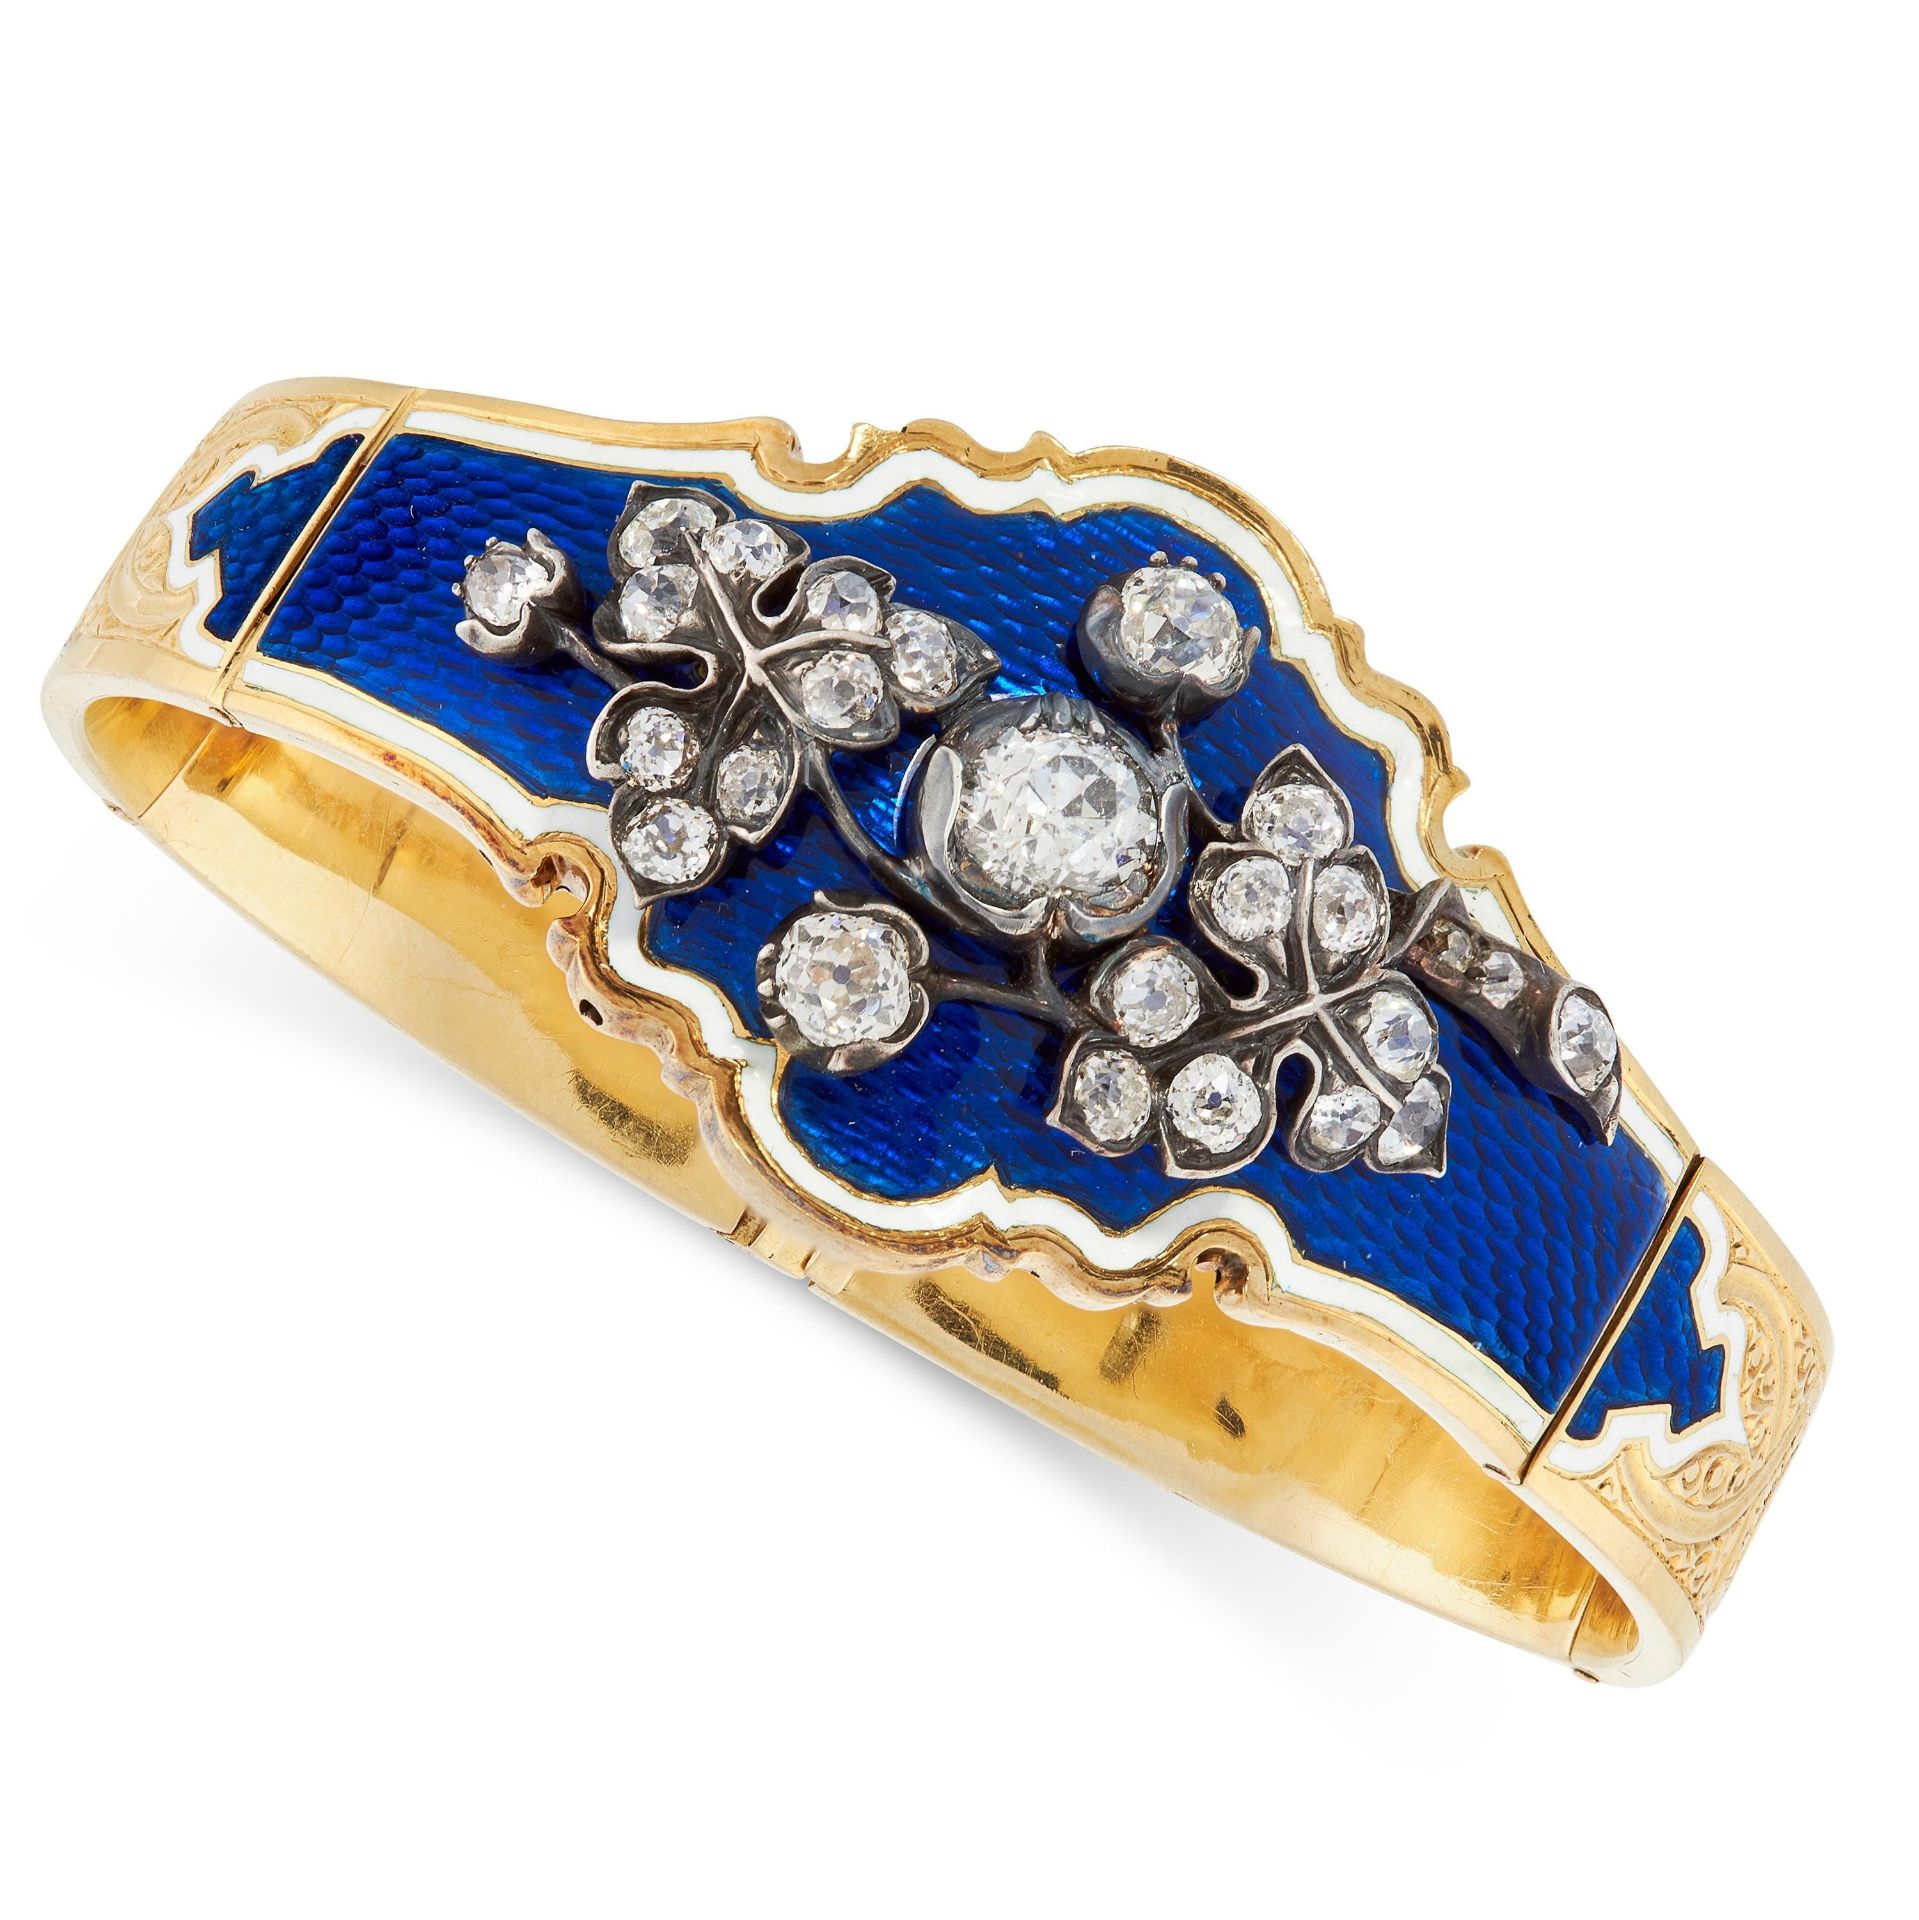 AN ANTIQUE DIAMOND AND ENAMEL BANGLE, 19TH CENTURY in high carat yellow gold and silver, the